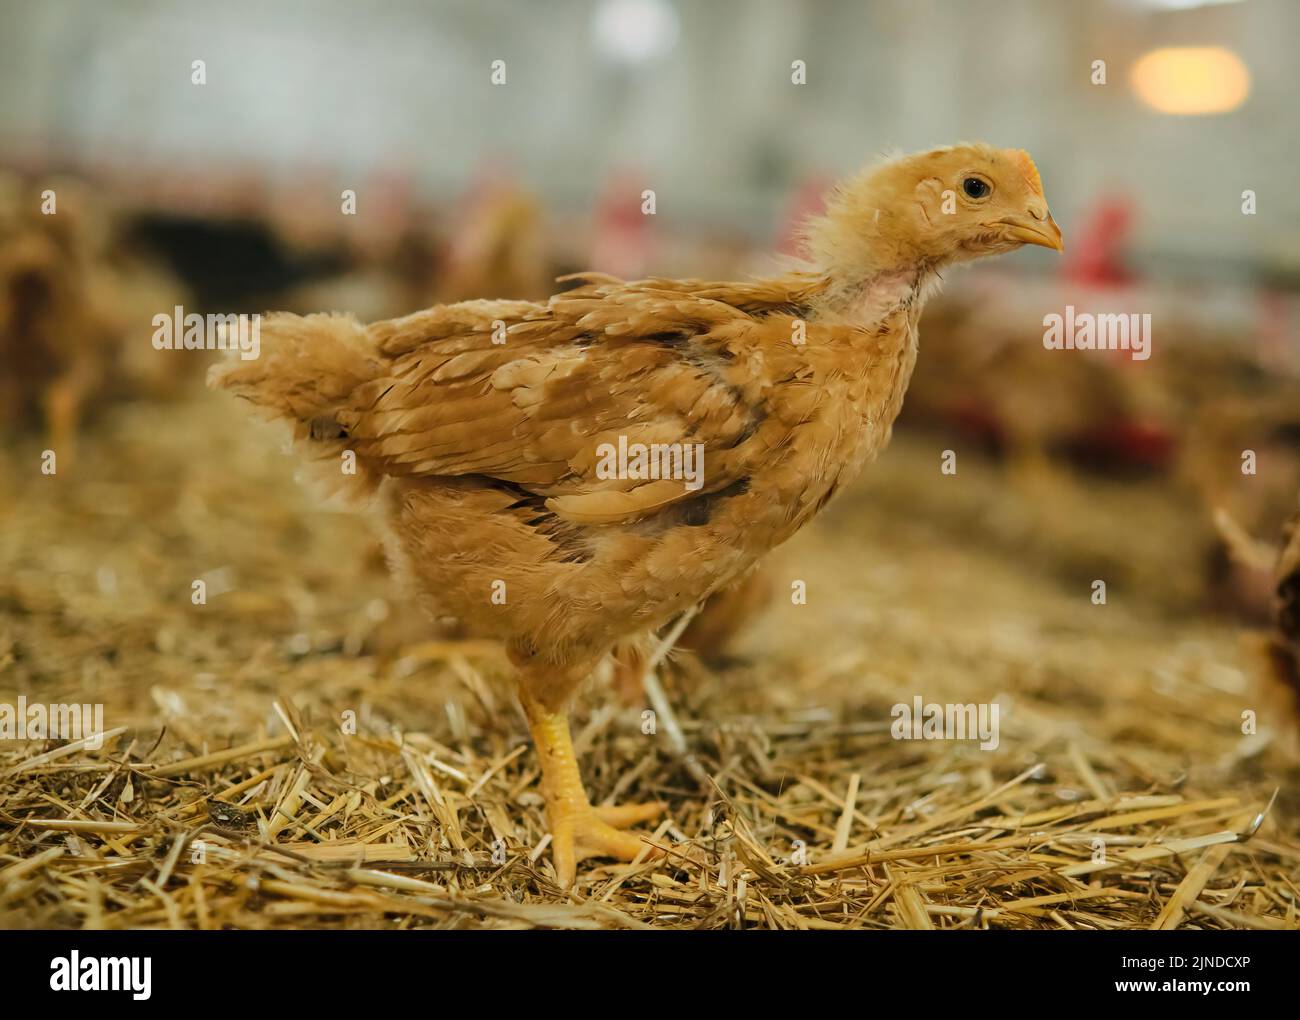 close up portrait pullet Chicken poultry straw bedding farm factory look camera Stock Photo